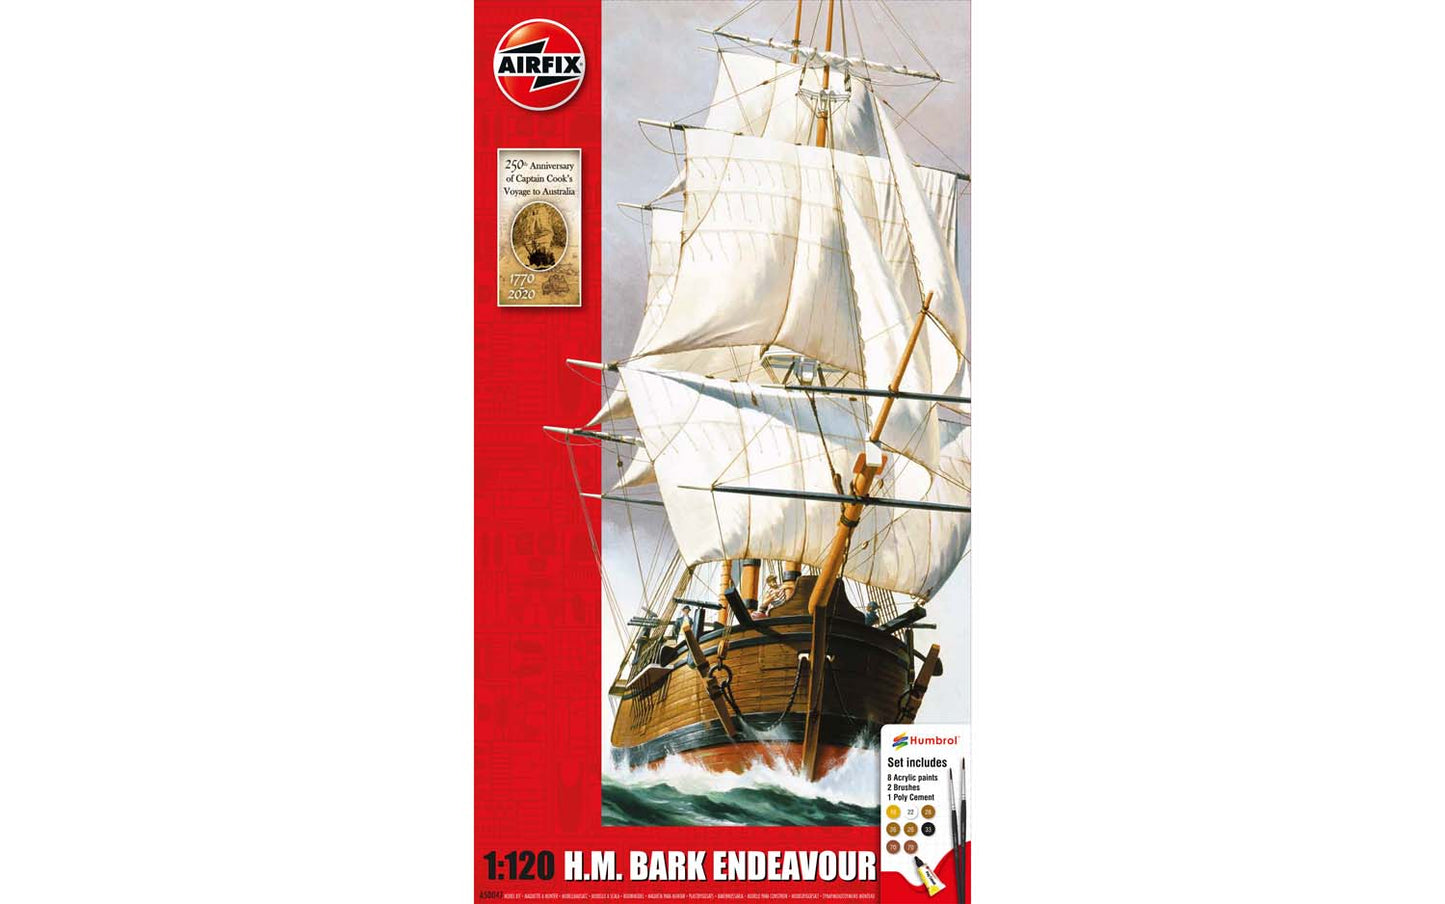 A50047 Endeavour Bark and Captain Cook 250th anniversary